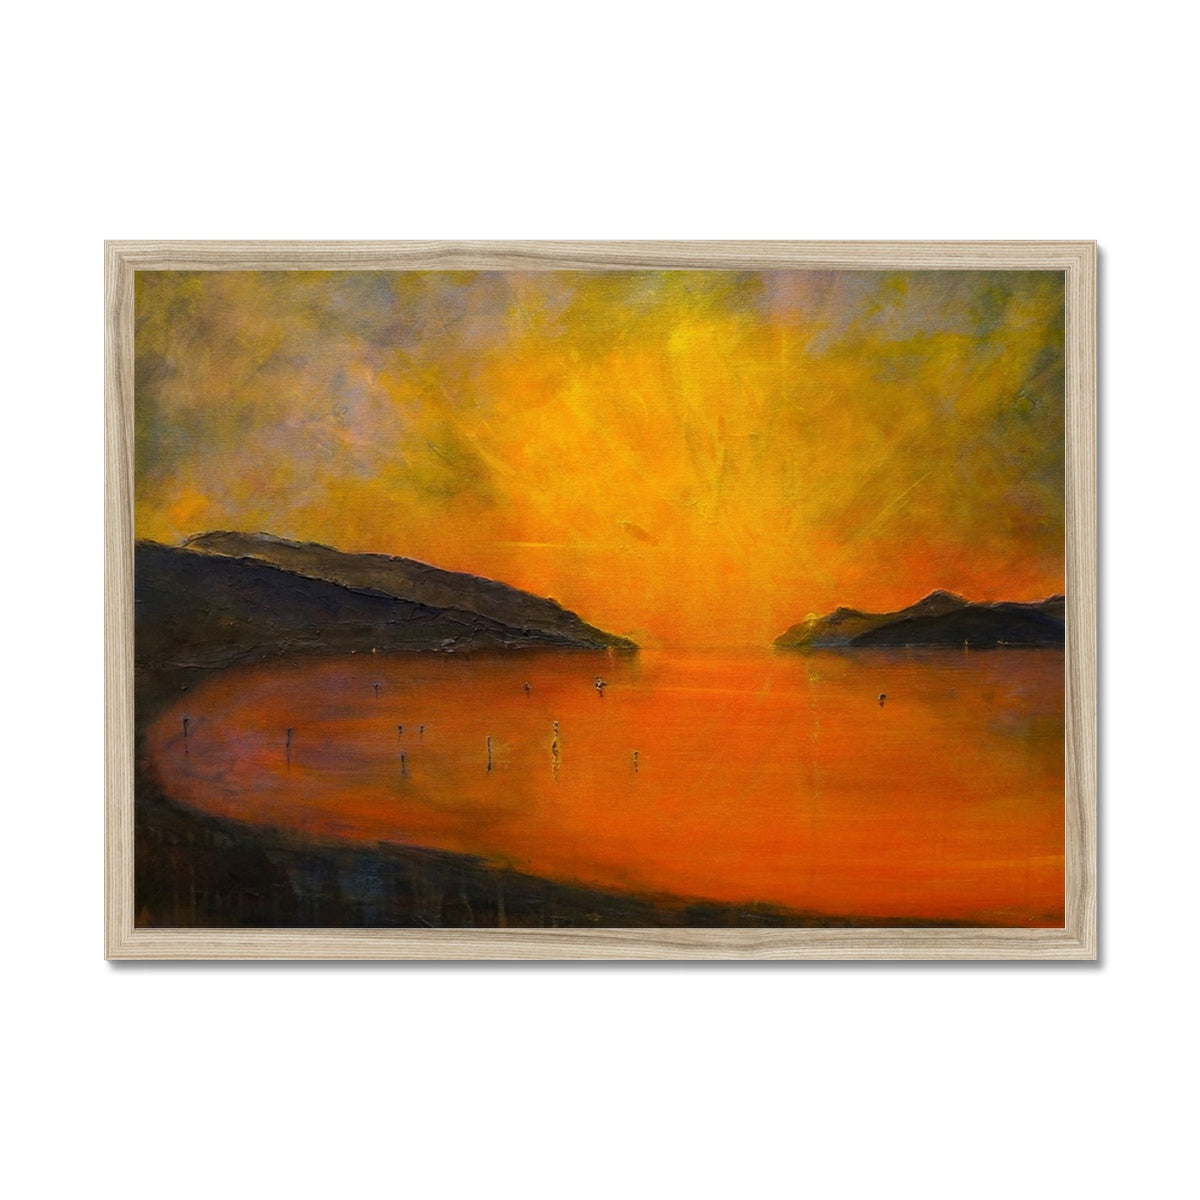 Loch Ness Sunset Painting | Framed Prints From Scotland-Framed Prints-Scottish Lochs & Mountains Art Gallery-A2 Landscape-Natural Frame-Paintings, Prints, Homeware, Art Gifts From Scotland By Scottish Artist Kevin Hunter